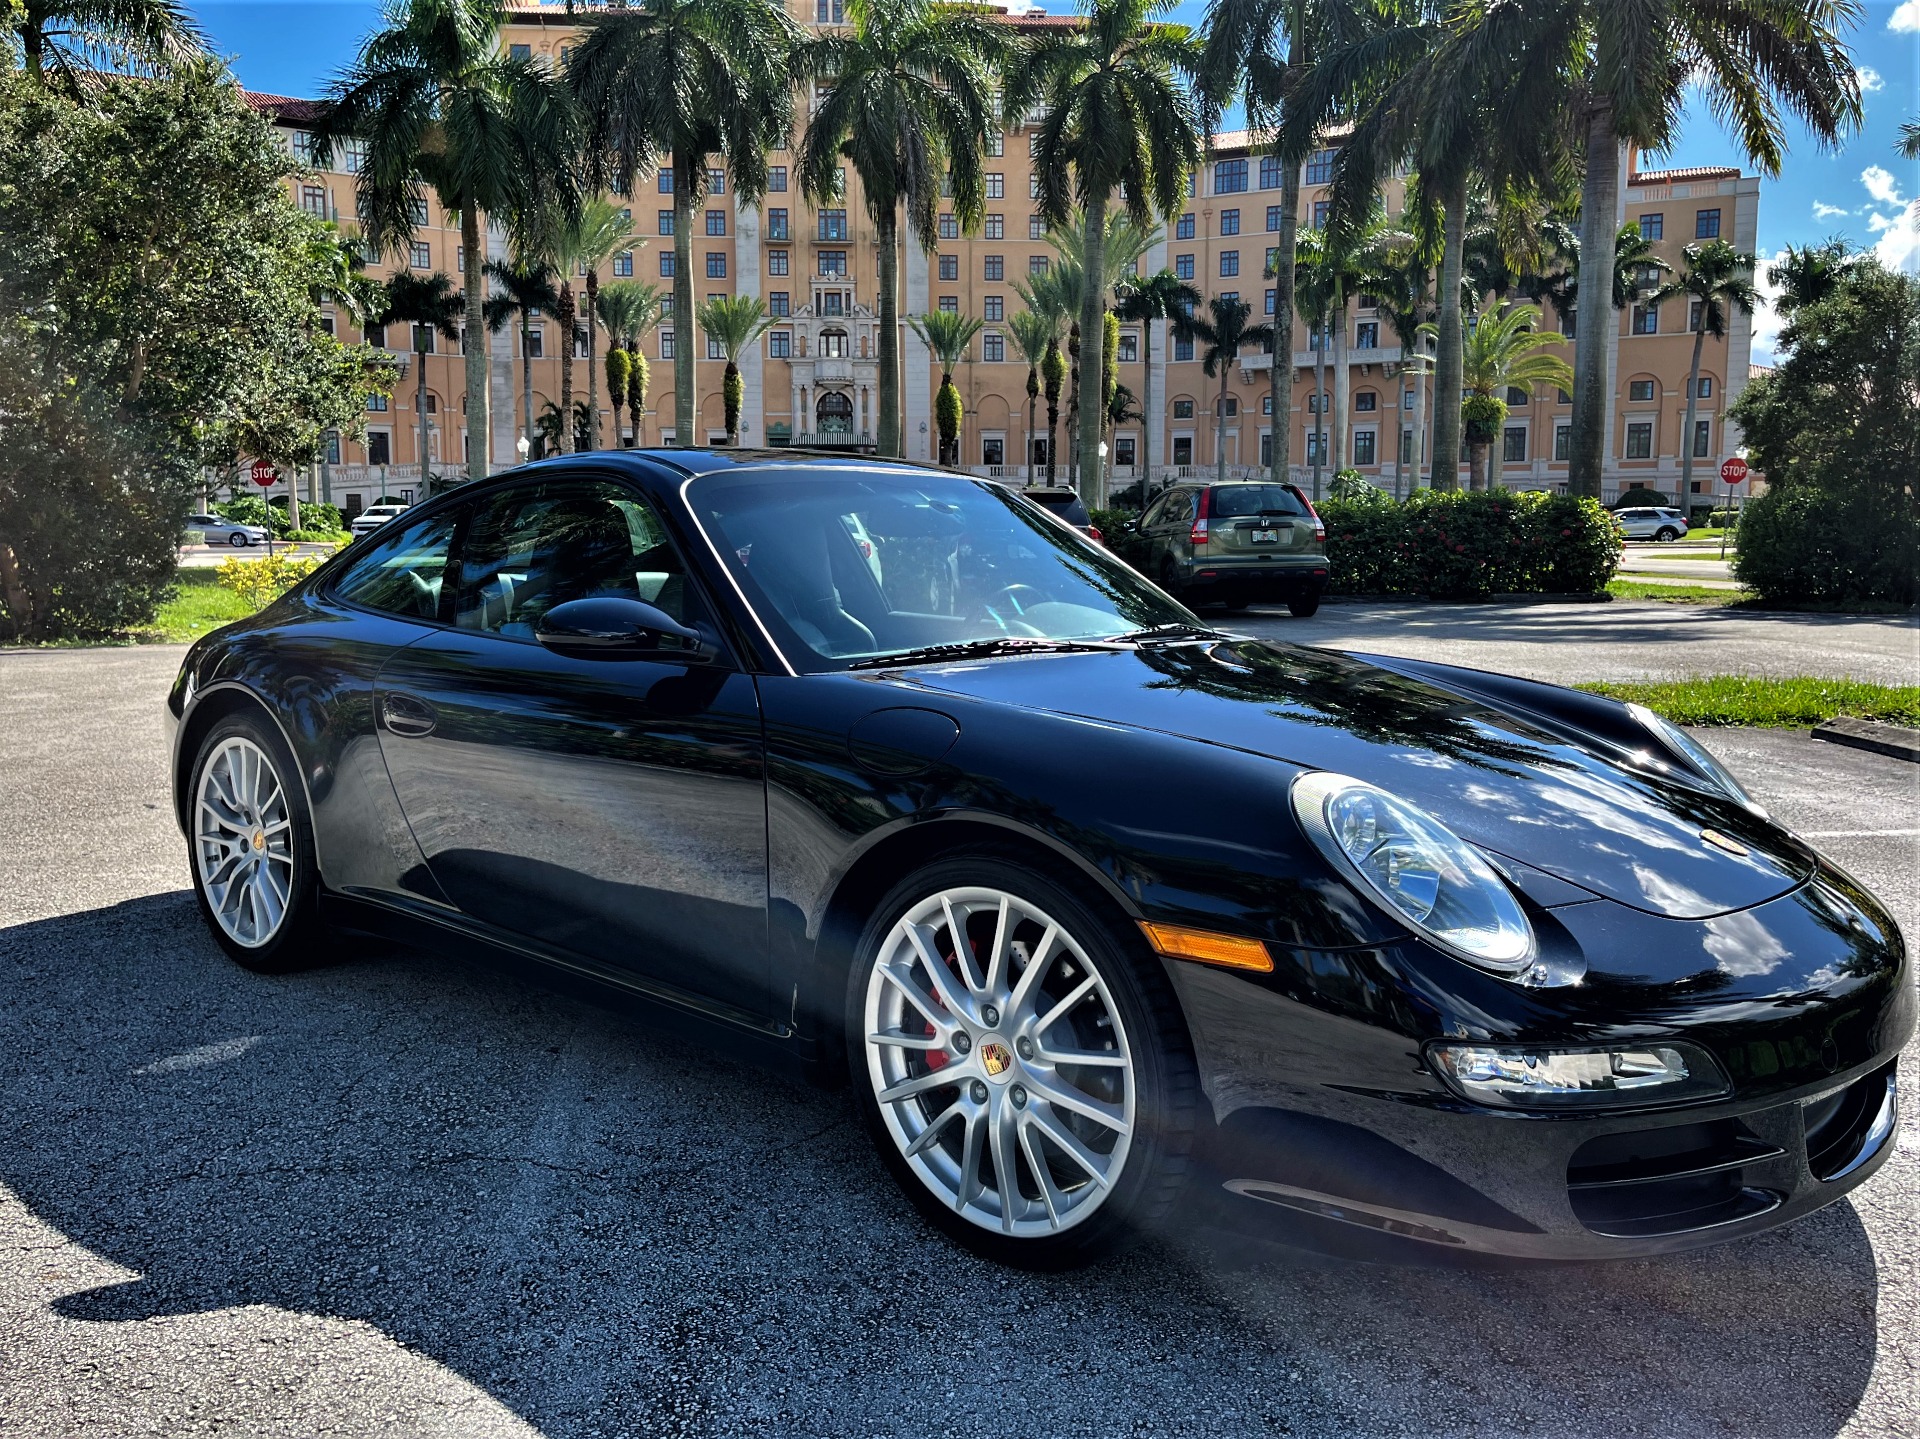 Used 2007 Porsche 911 Carrera S for sale Sold at The Gables Sports Cars in Miami FL 33146 1